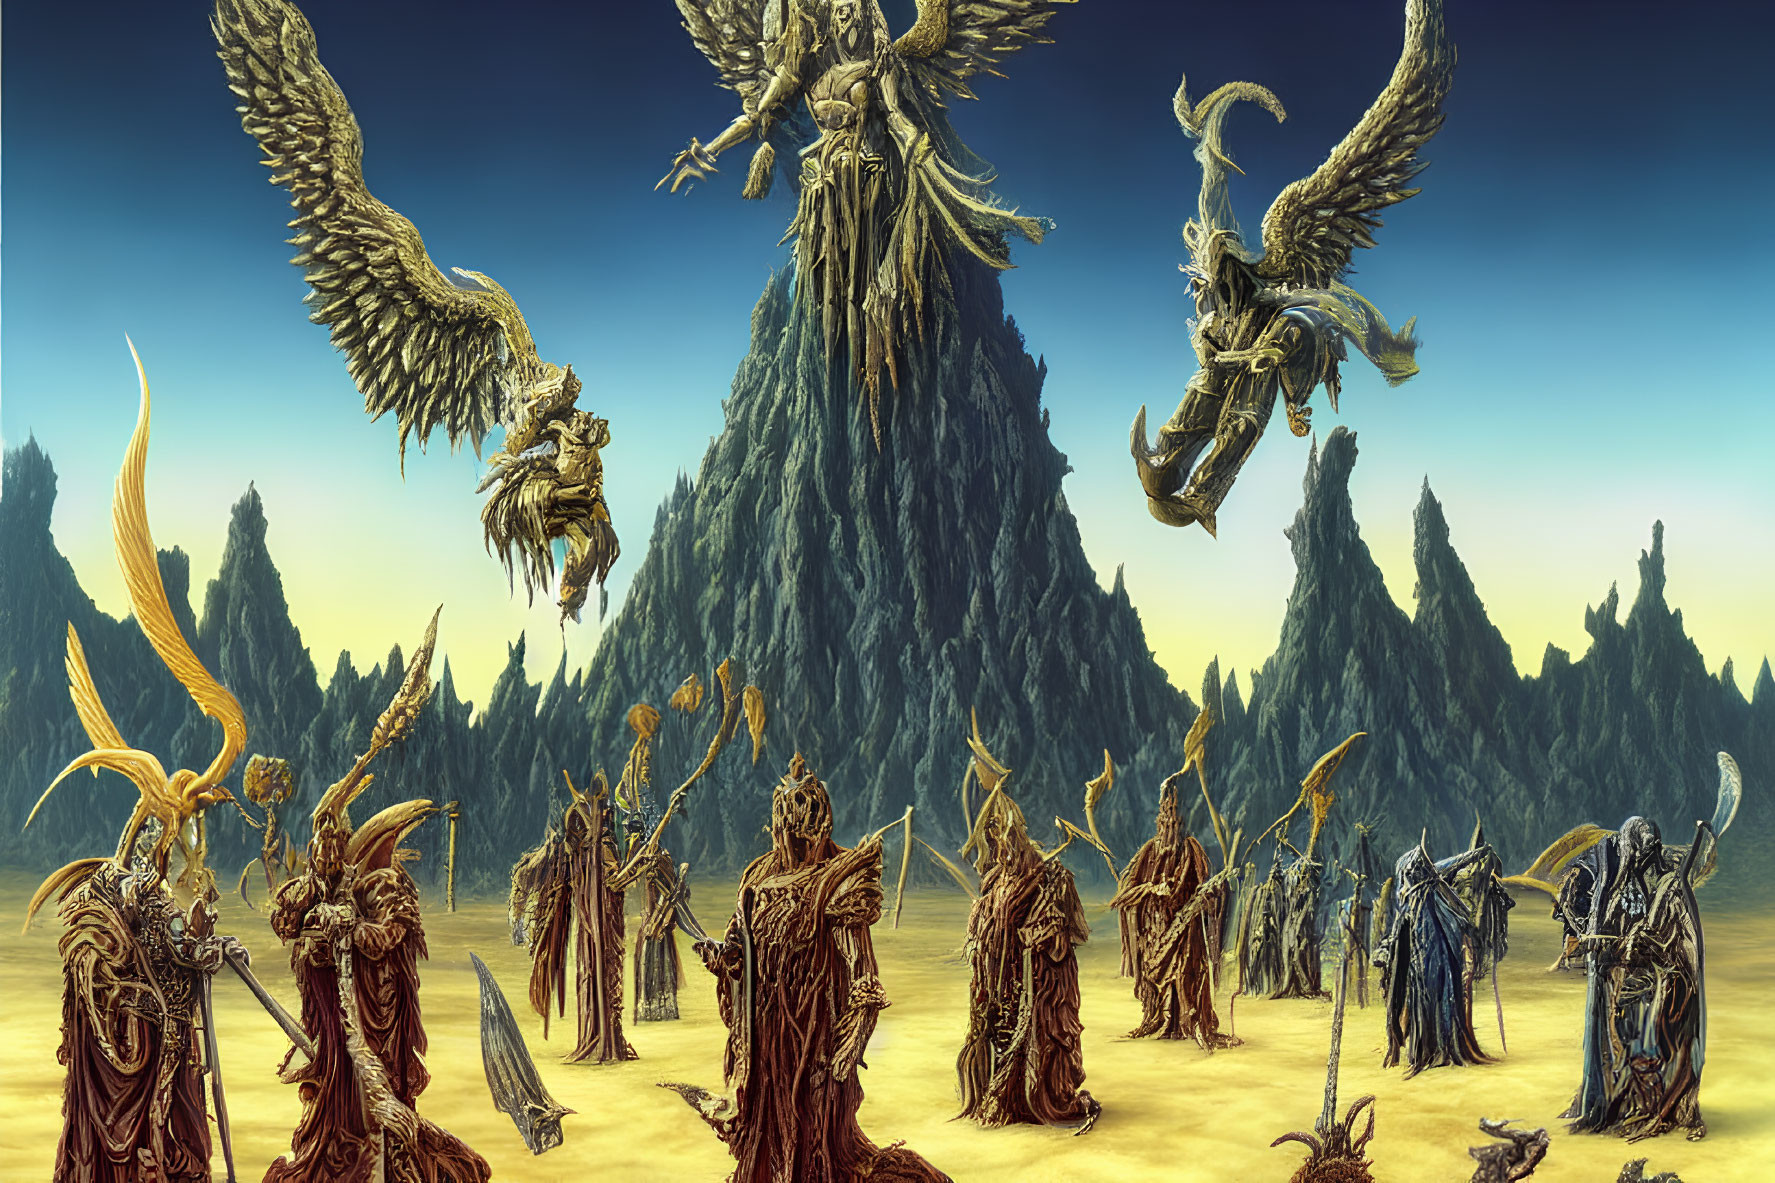 Fantasy landscape with armored figures, winged beings, and rocky spires under blue sky